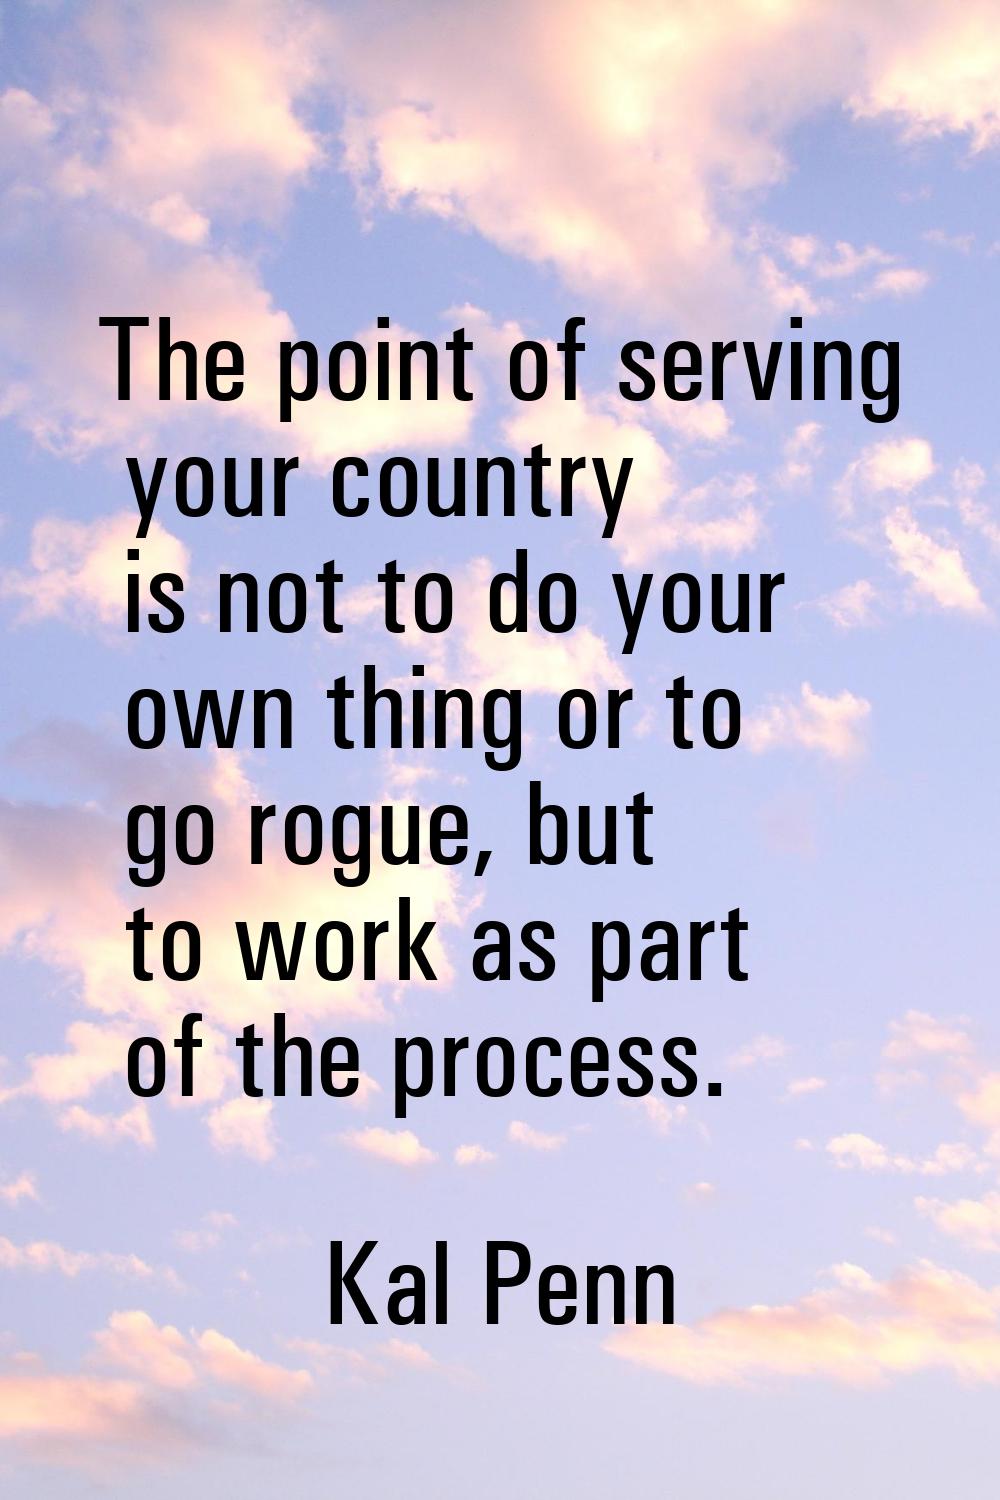 The point of serving your country is not to do your own thing or to go rogue, but to work as part o